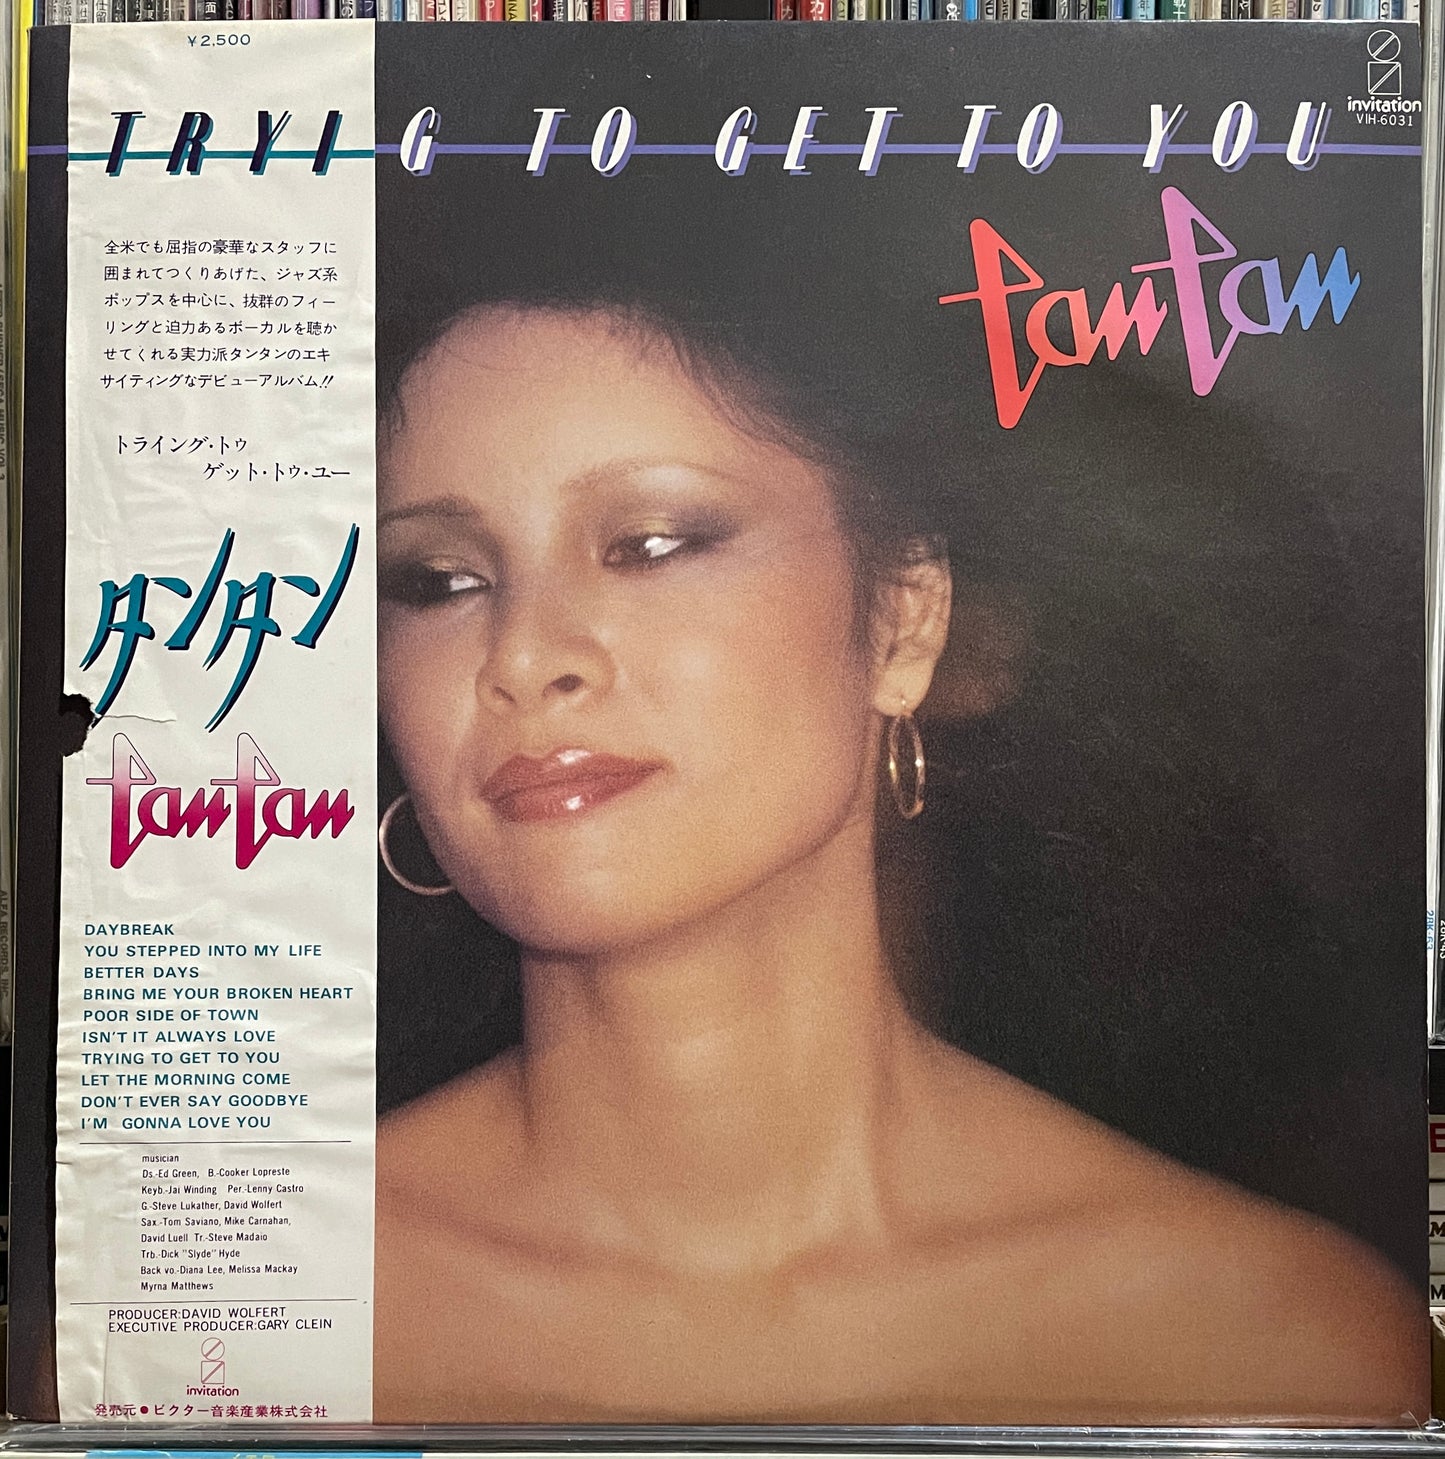 Tan Tan “Trying To Get To You” (1978)